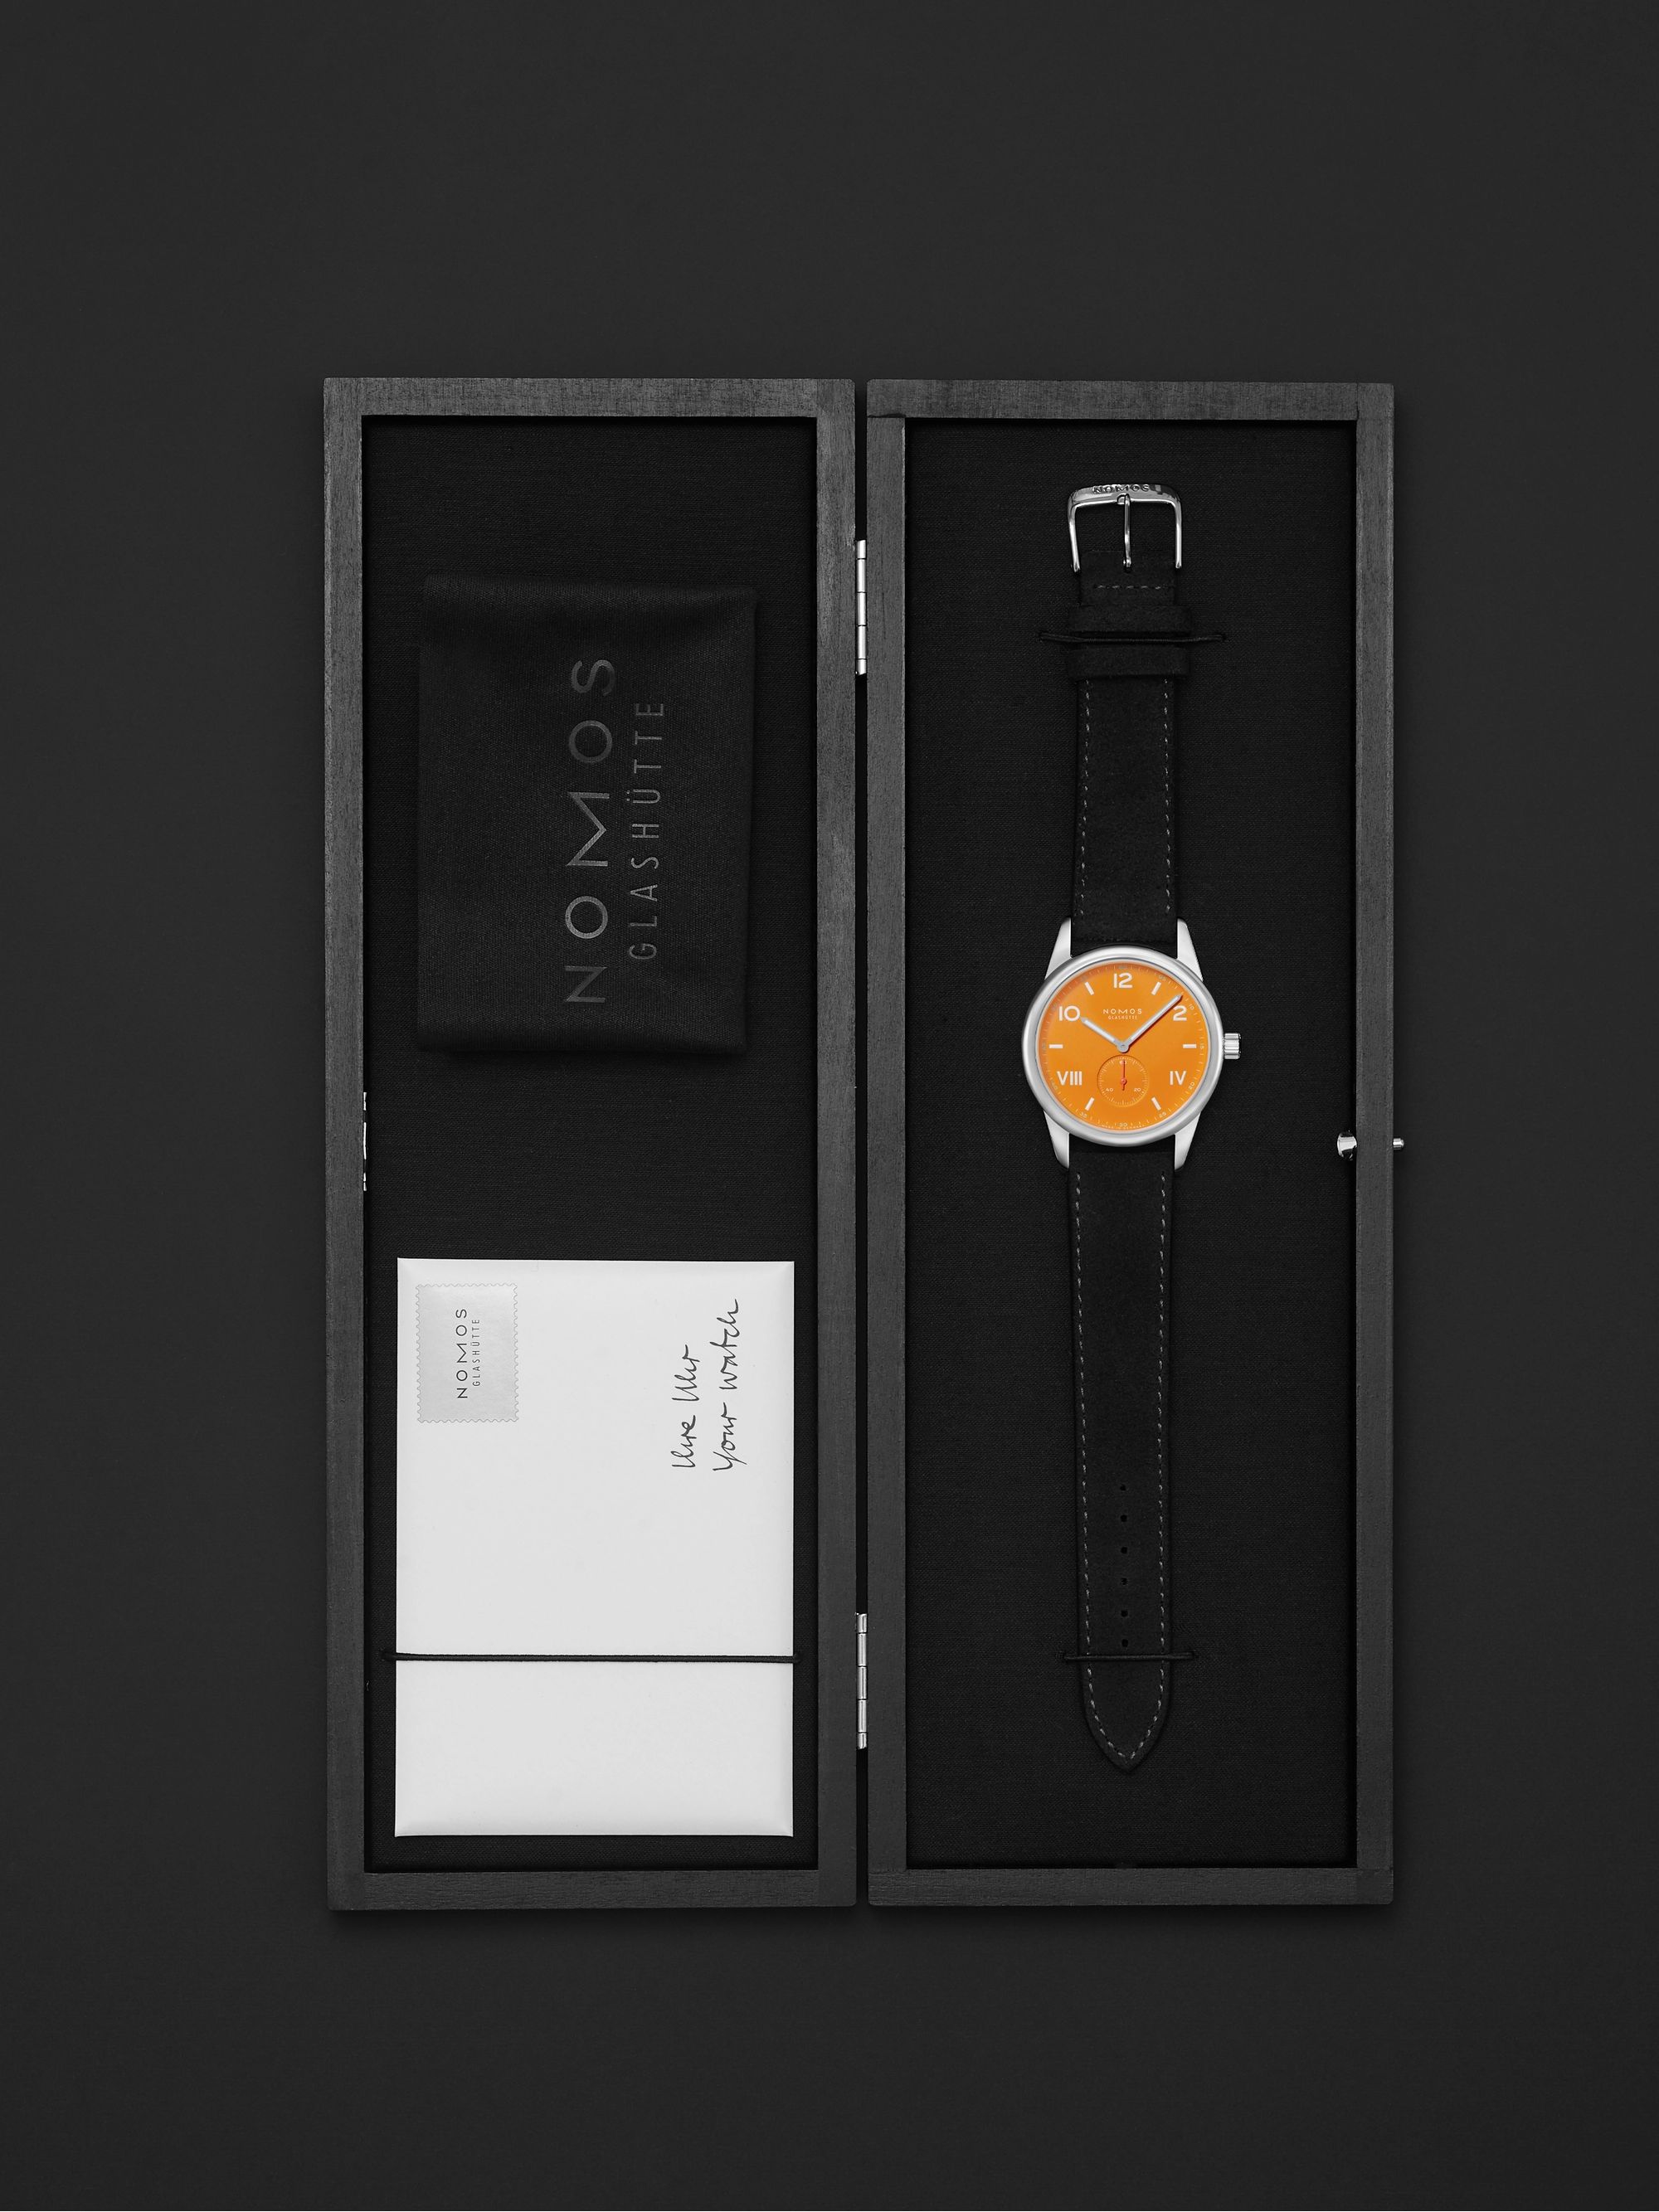 NOMOS GLASHÜTTE Club Campus Hand-Wound 38mm Stainless Steel and Leather Watch, Ref. No. 729